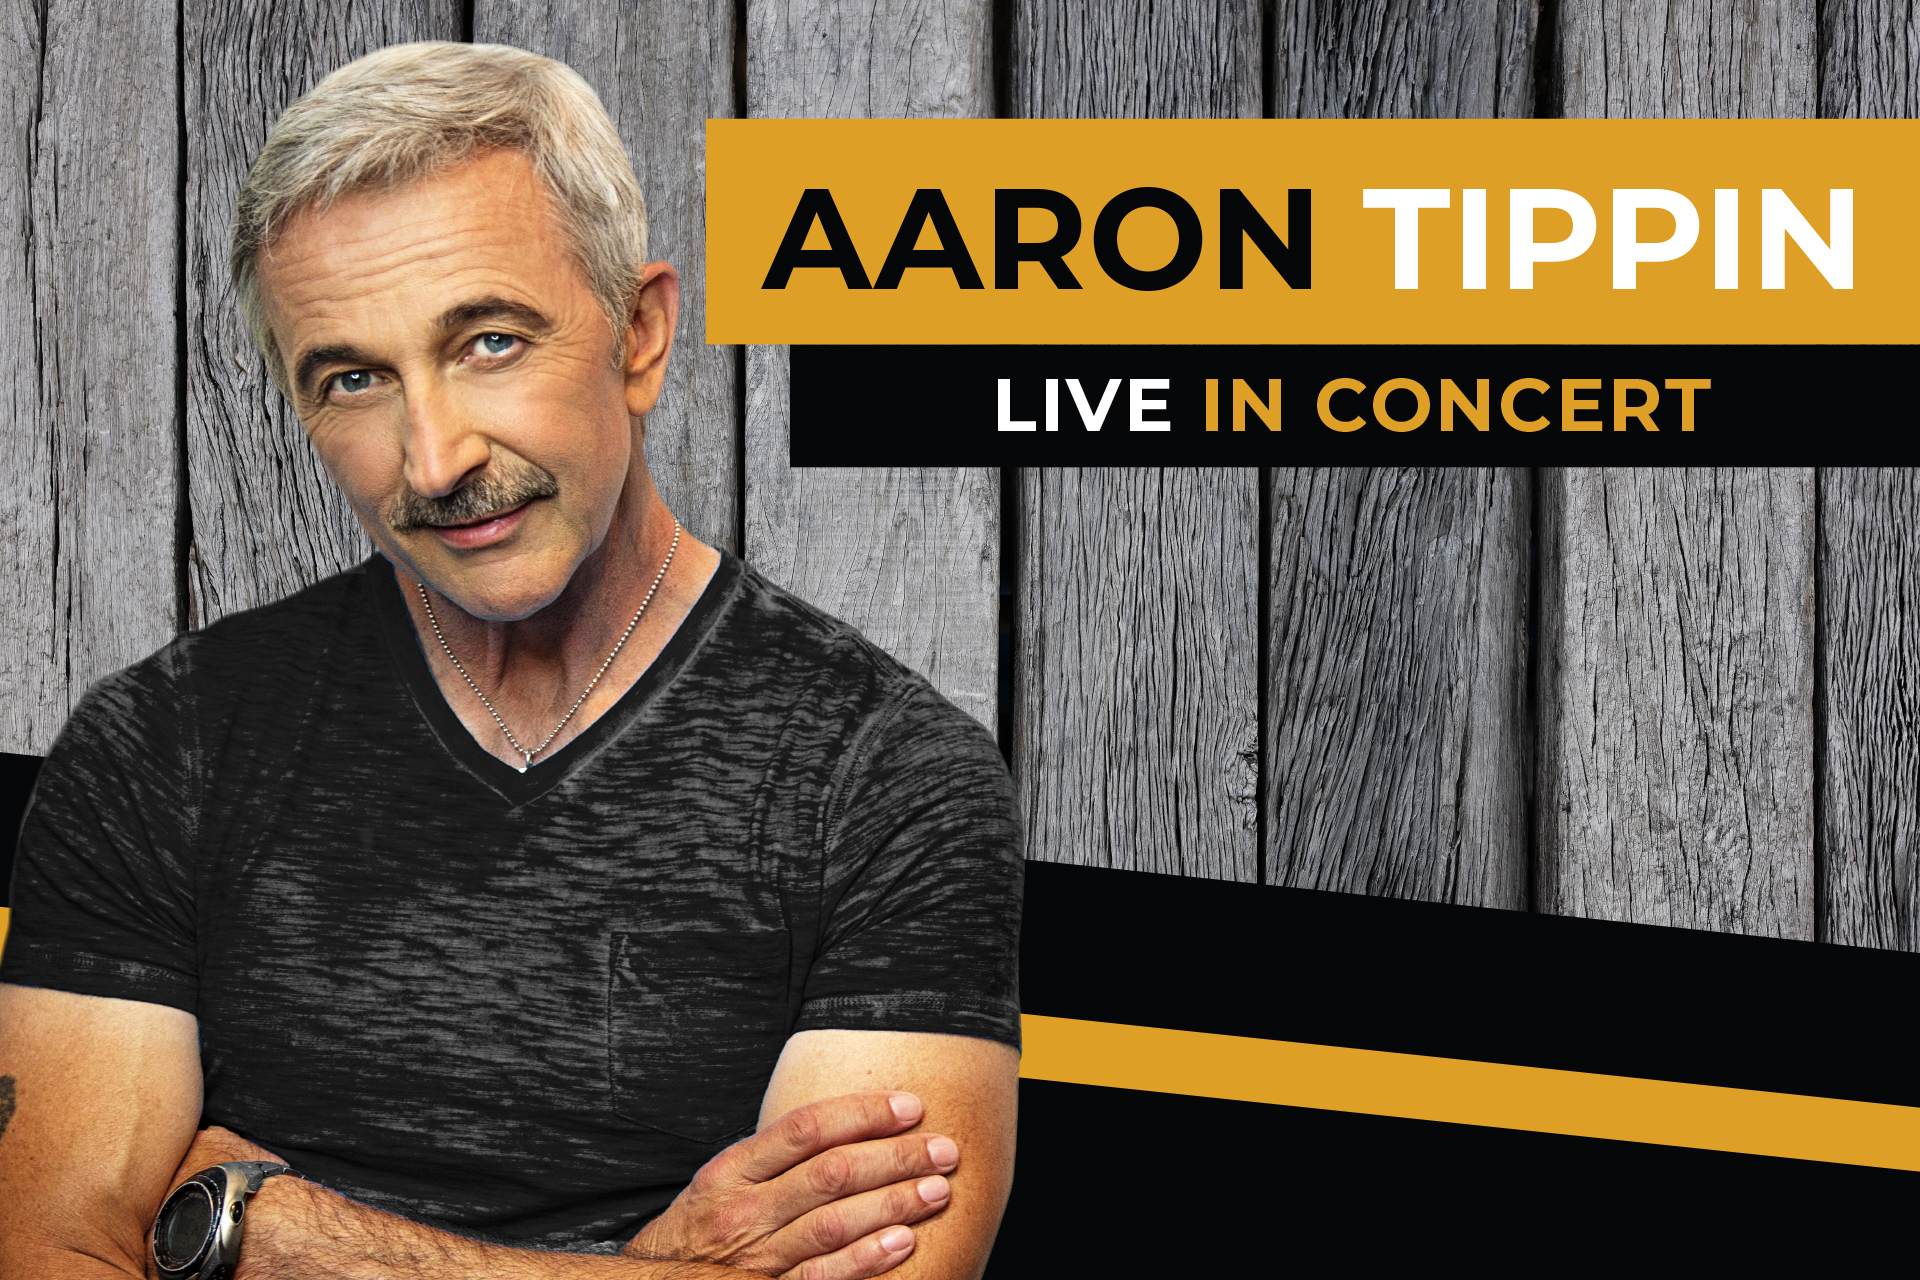 Aaron Tippin at the Effingham Performance Center